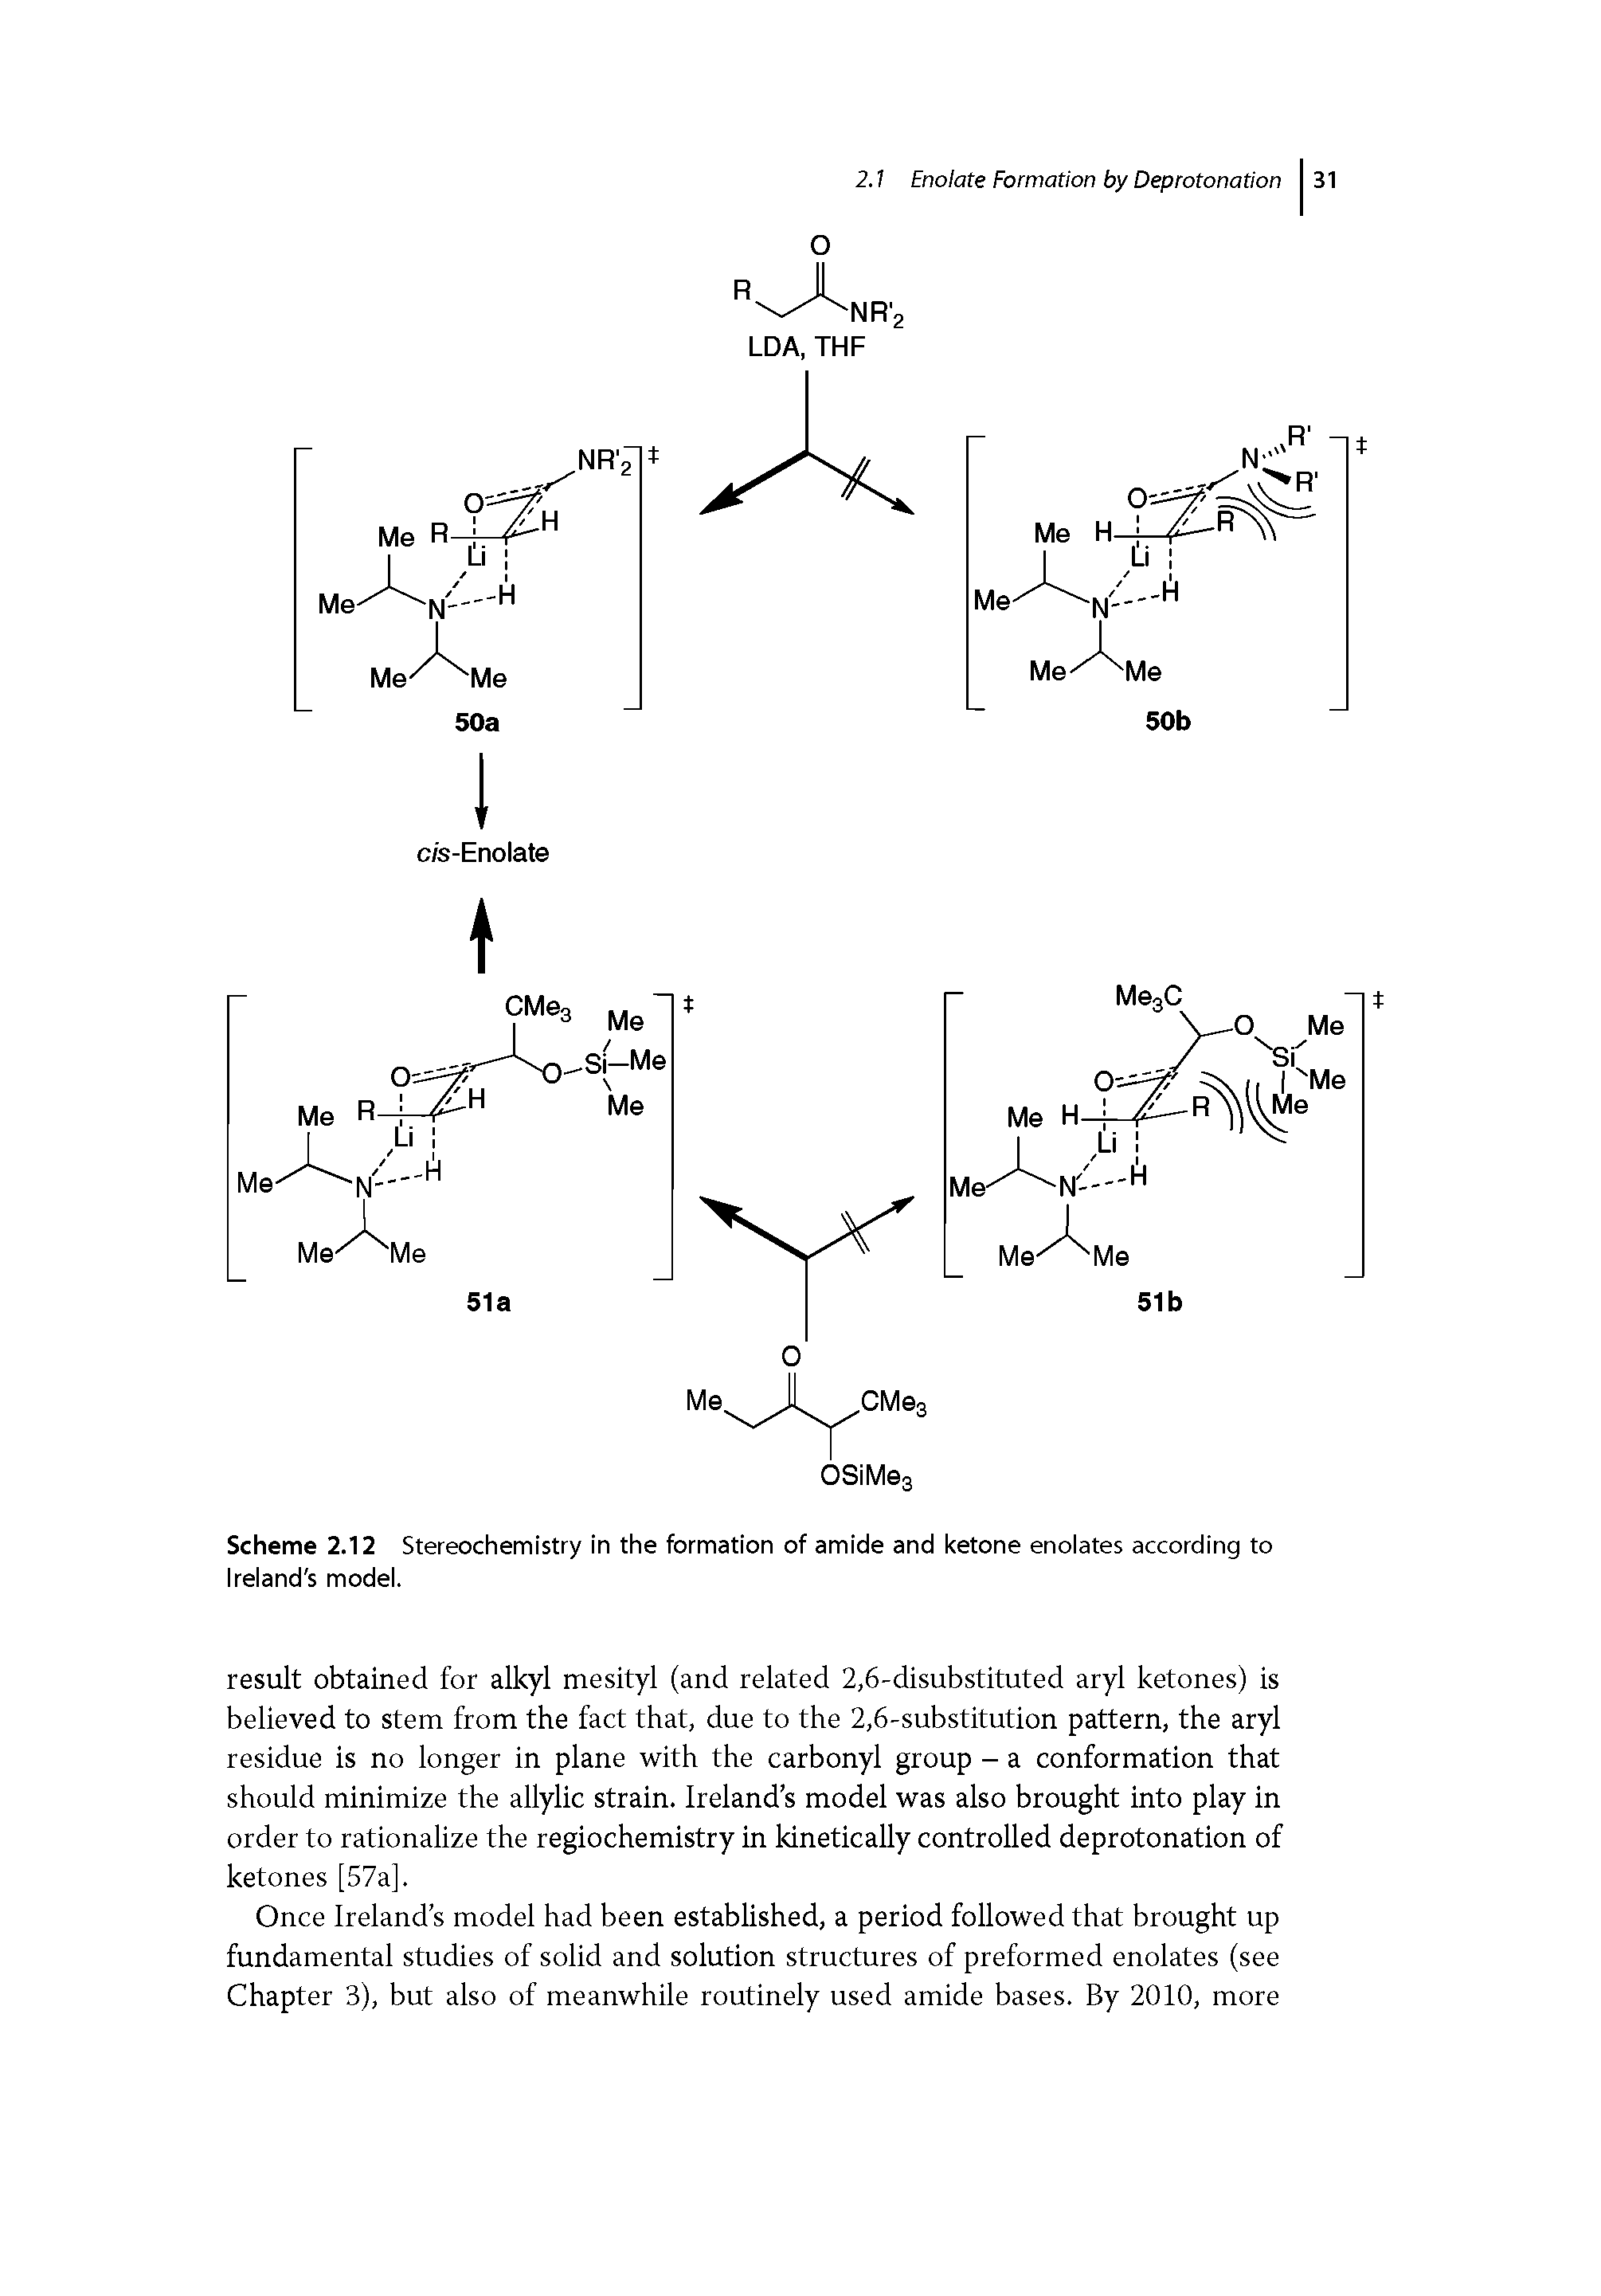 Scheme 2.12 Stereochemistry in the formation of amide and ketone enolates according to Ireland s model.